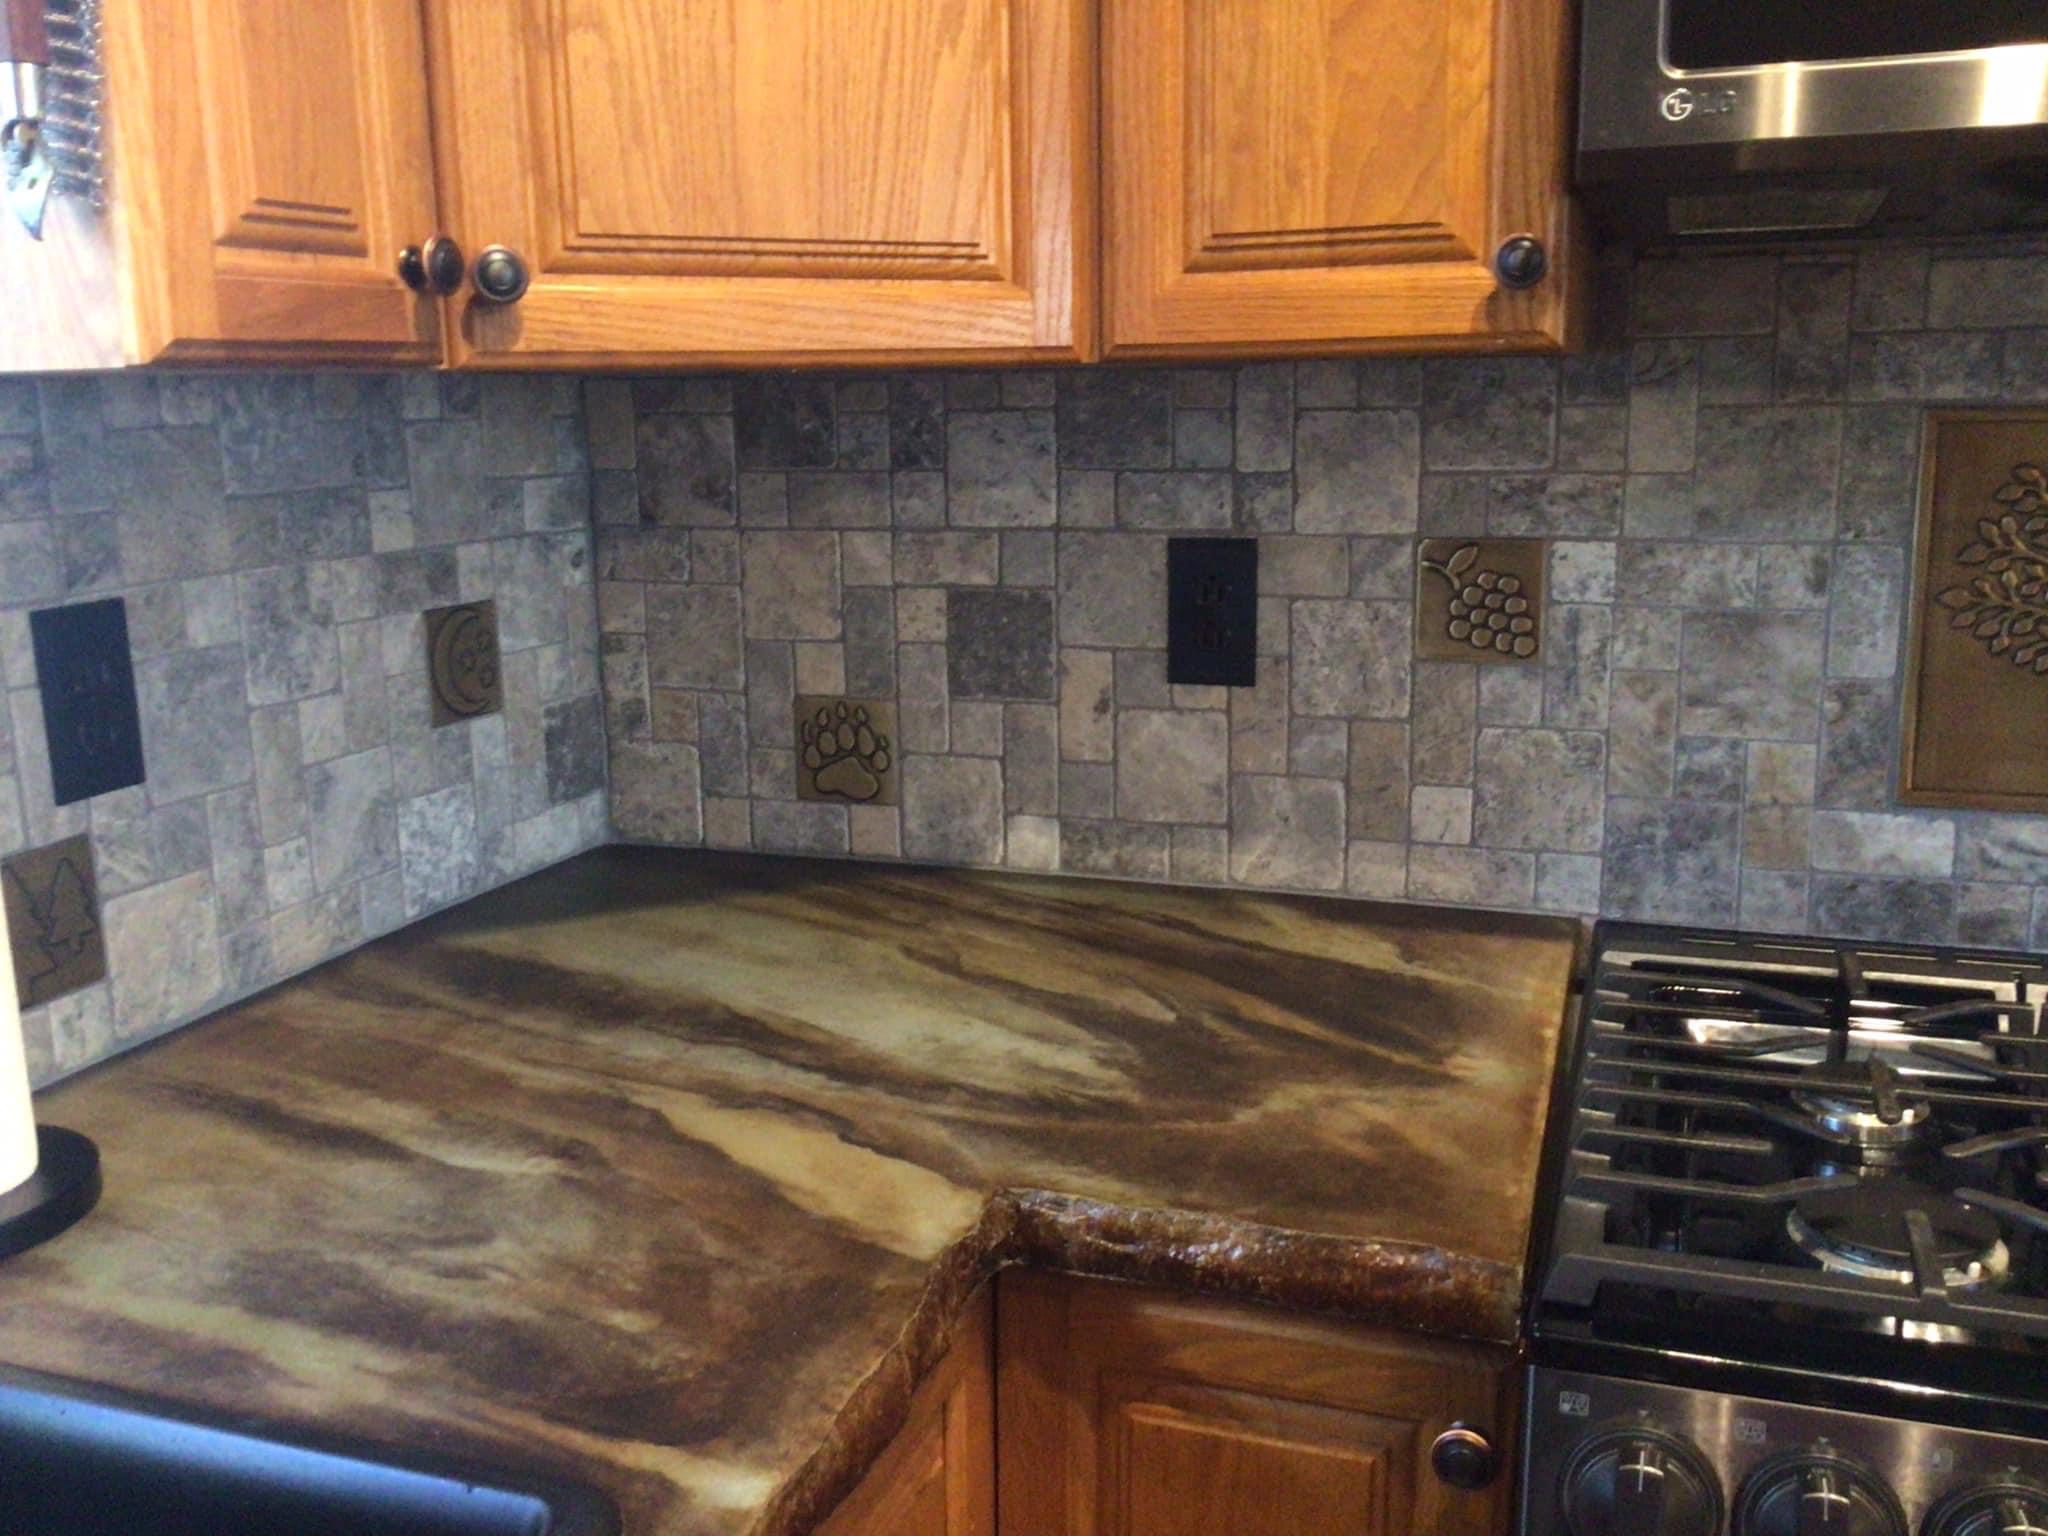 Rustic mottled kitchen concrete countertop acid stained with Coffee Brown, Seagrass, and Desert Amber colors